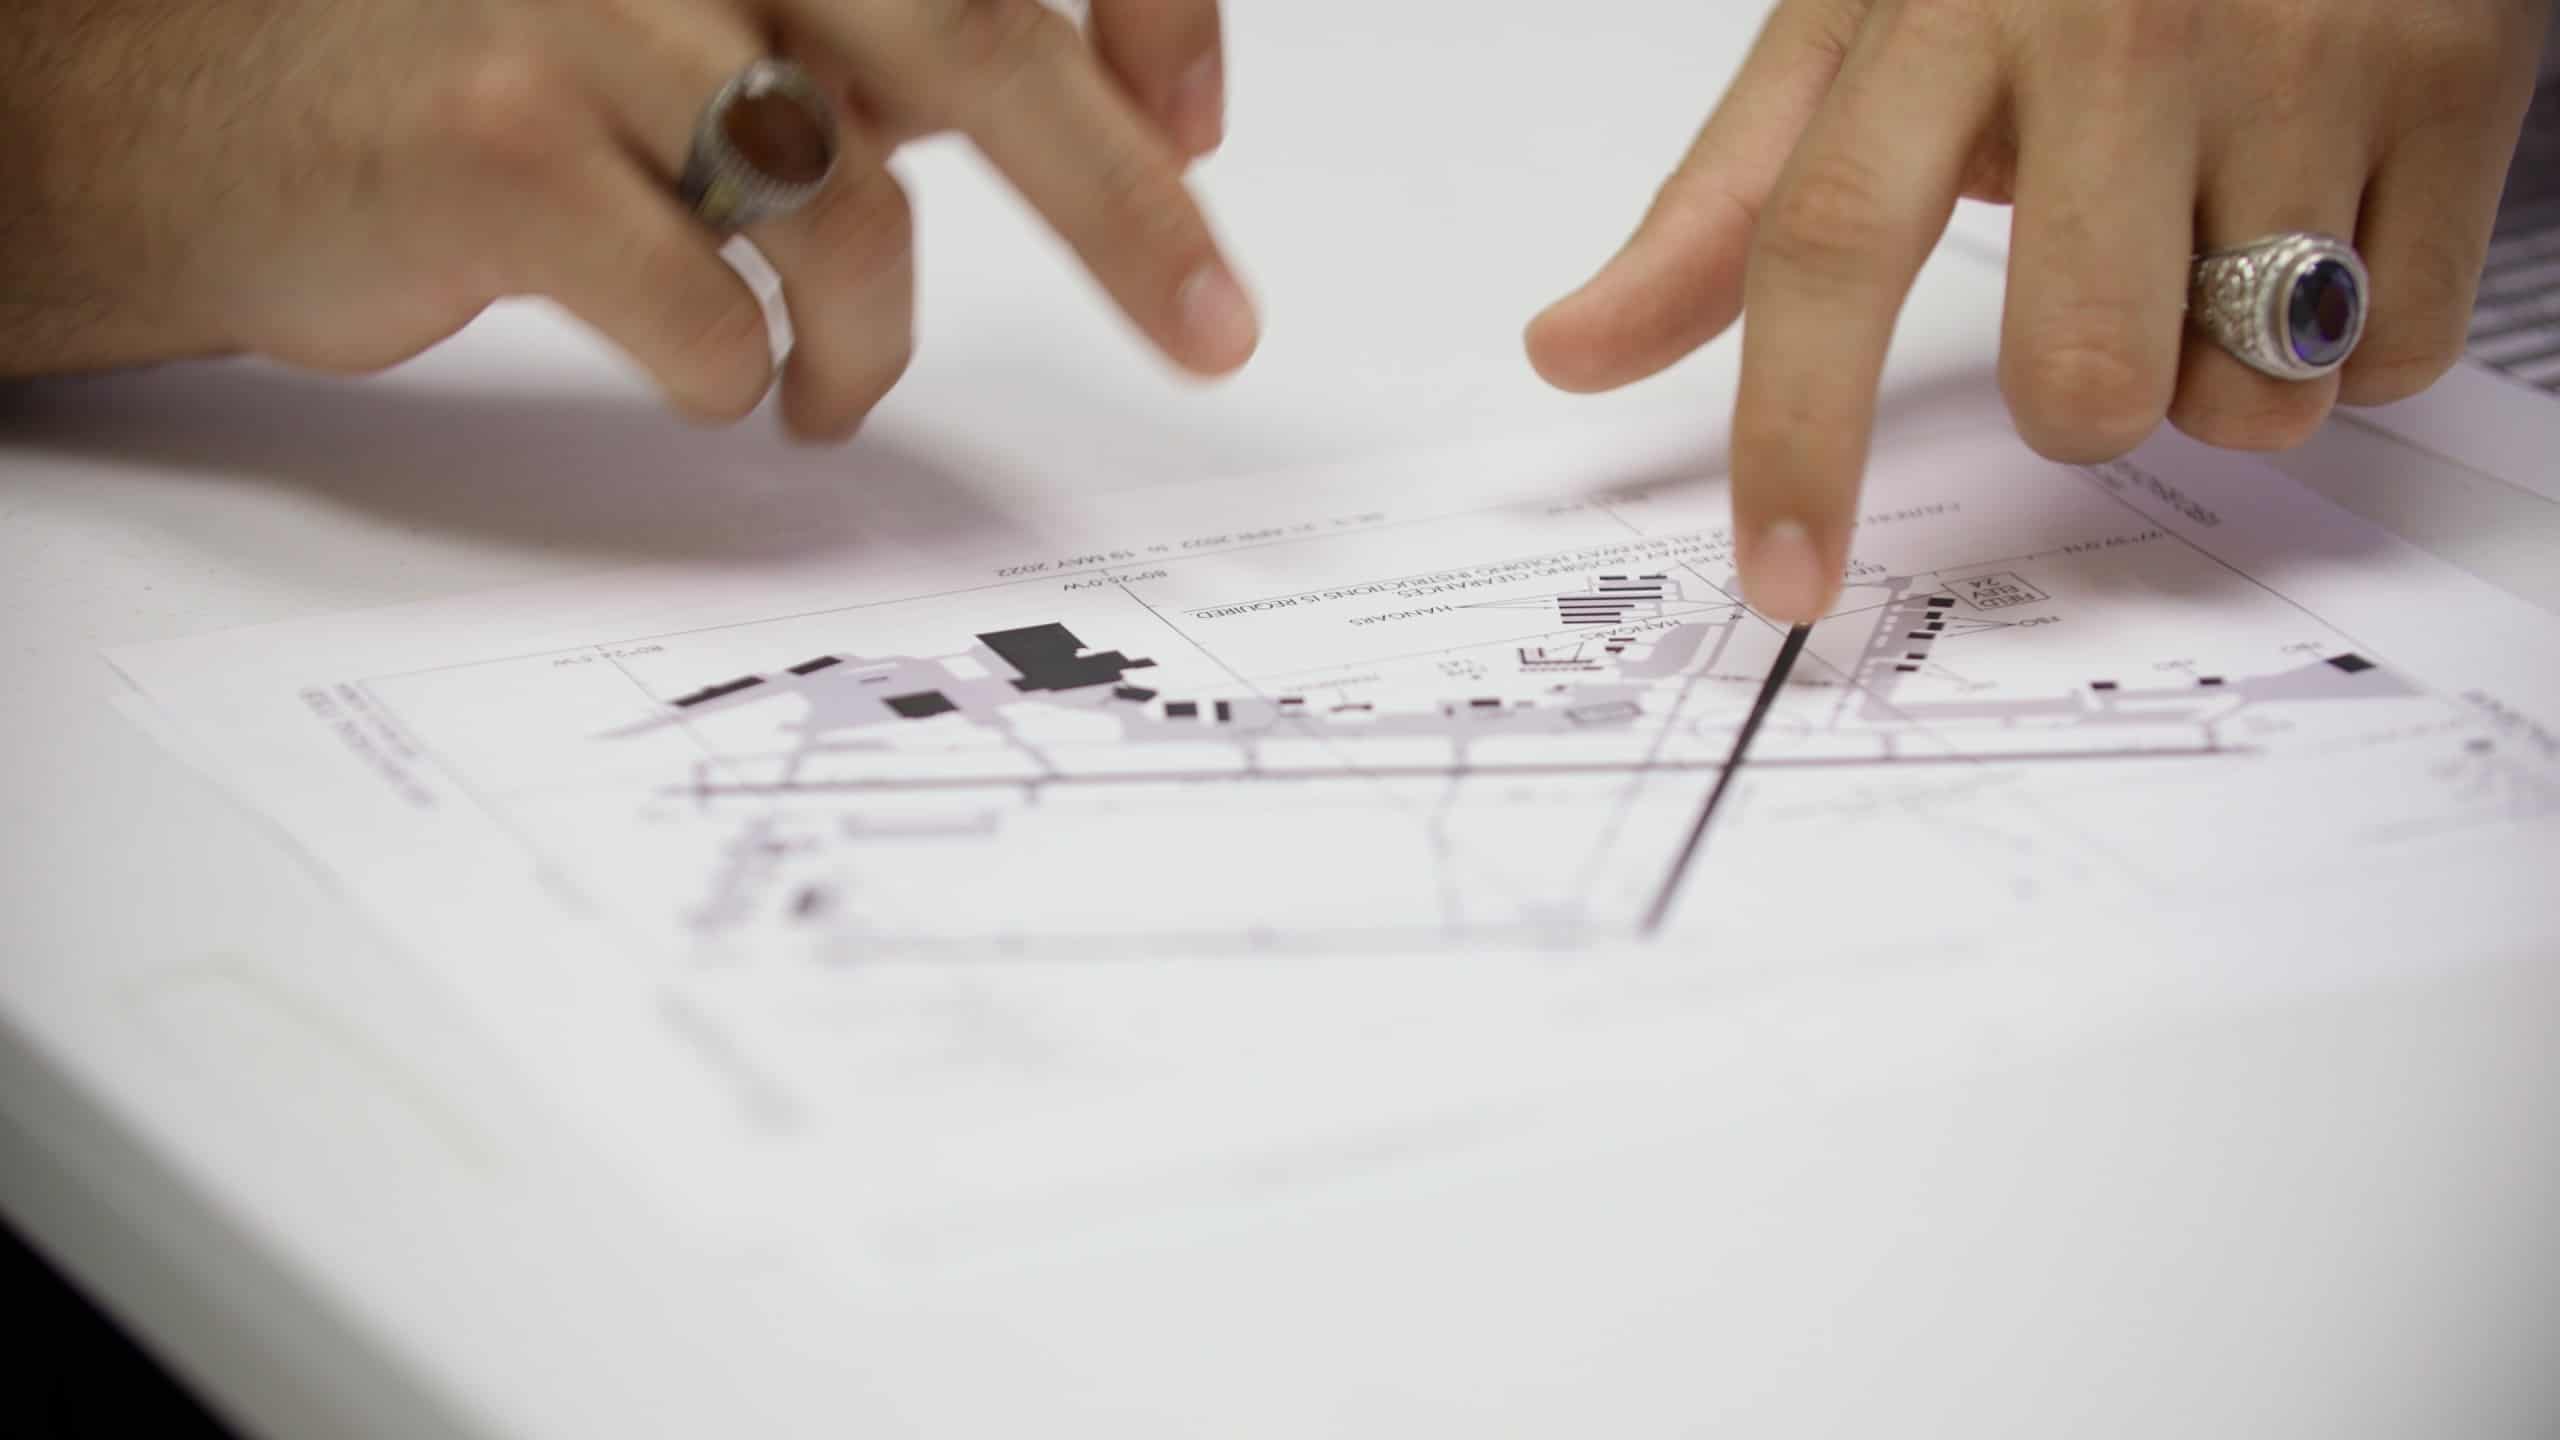 Photo of two people's hands pointing at a diagram on a desk